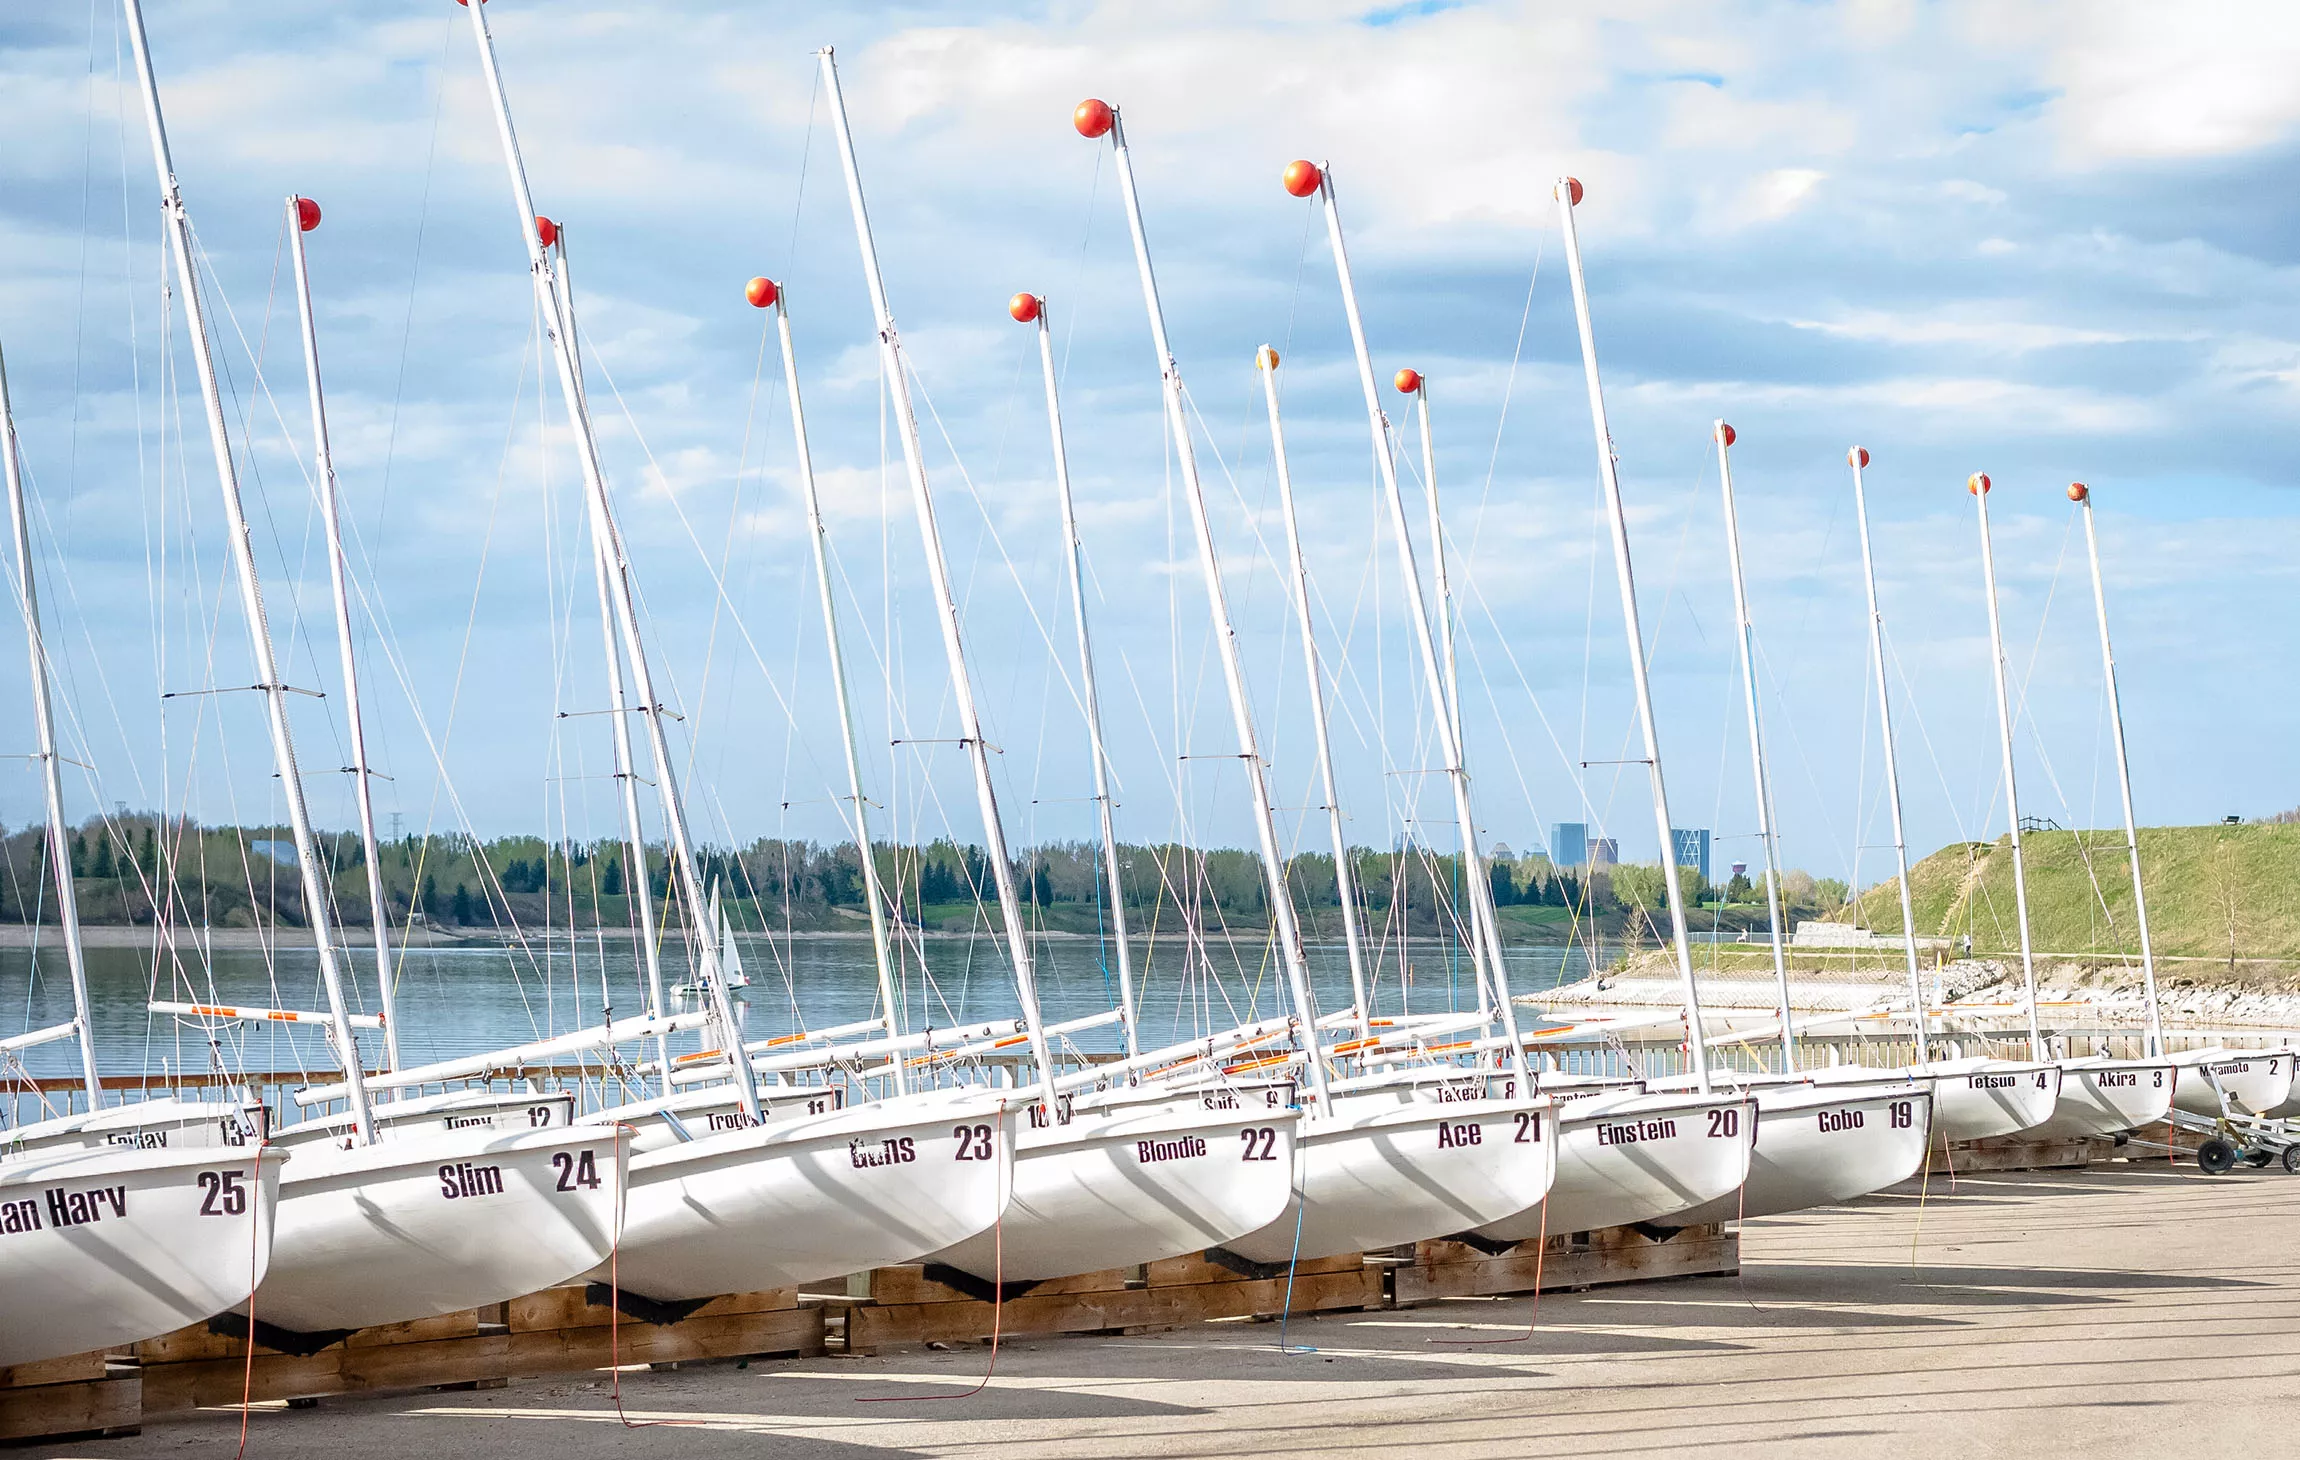 Glenmore Sailing School in Canada, North America | Yachting - Rated 0.8